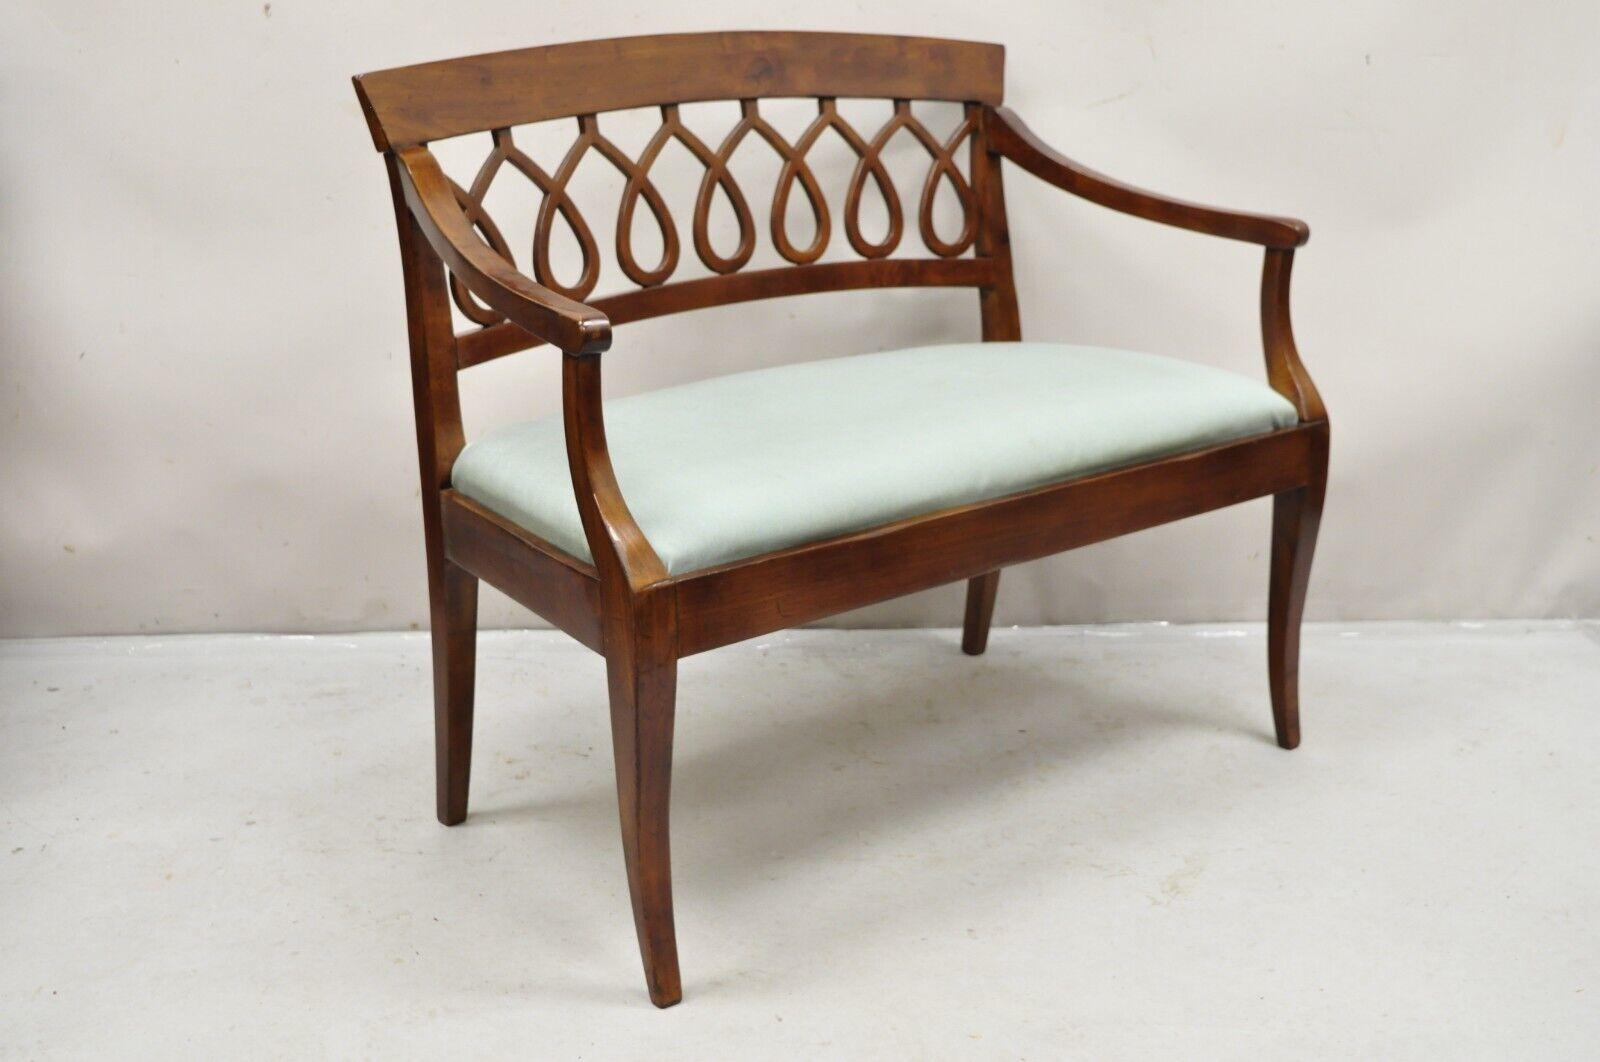 Vtg Italian Neoclassical Style Cherry Wood Spiral Carved Small Bench Loveseat. Item features solid wood construction, 